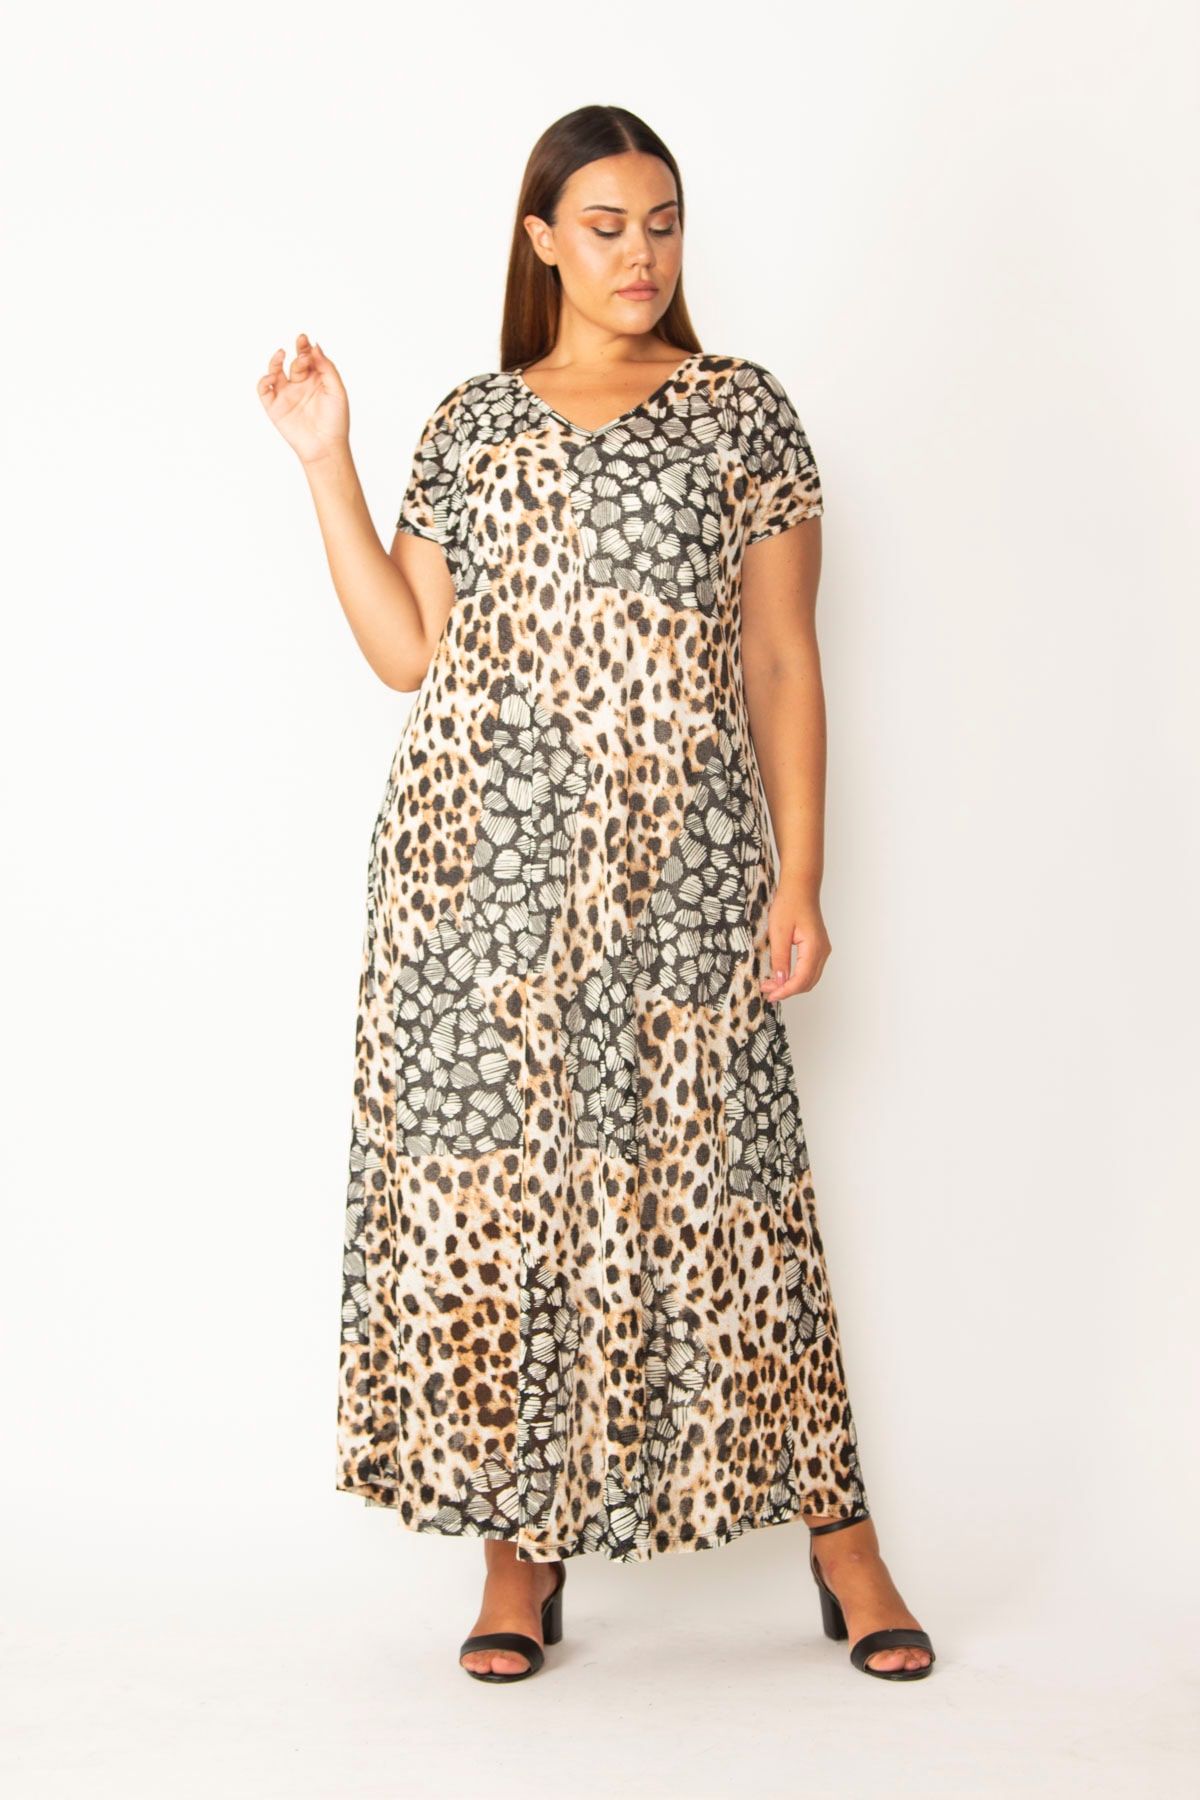 Polyester-Chiffon mit Leopardenmuster